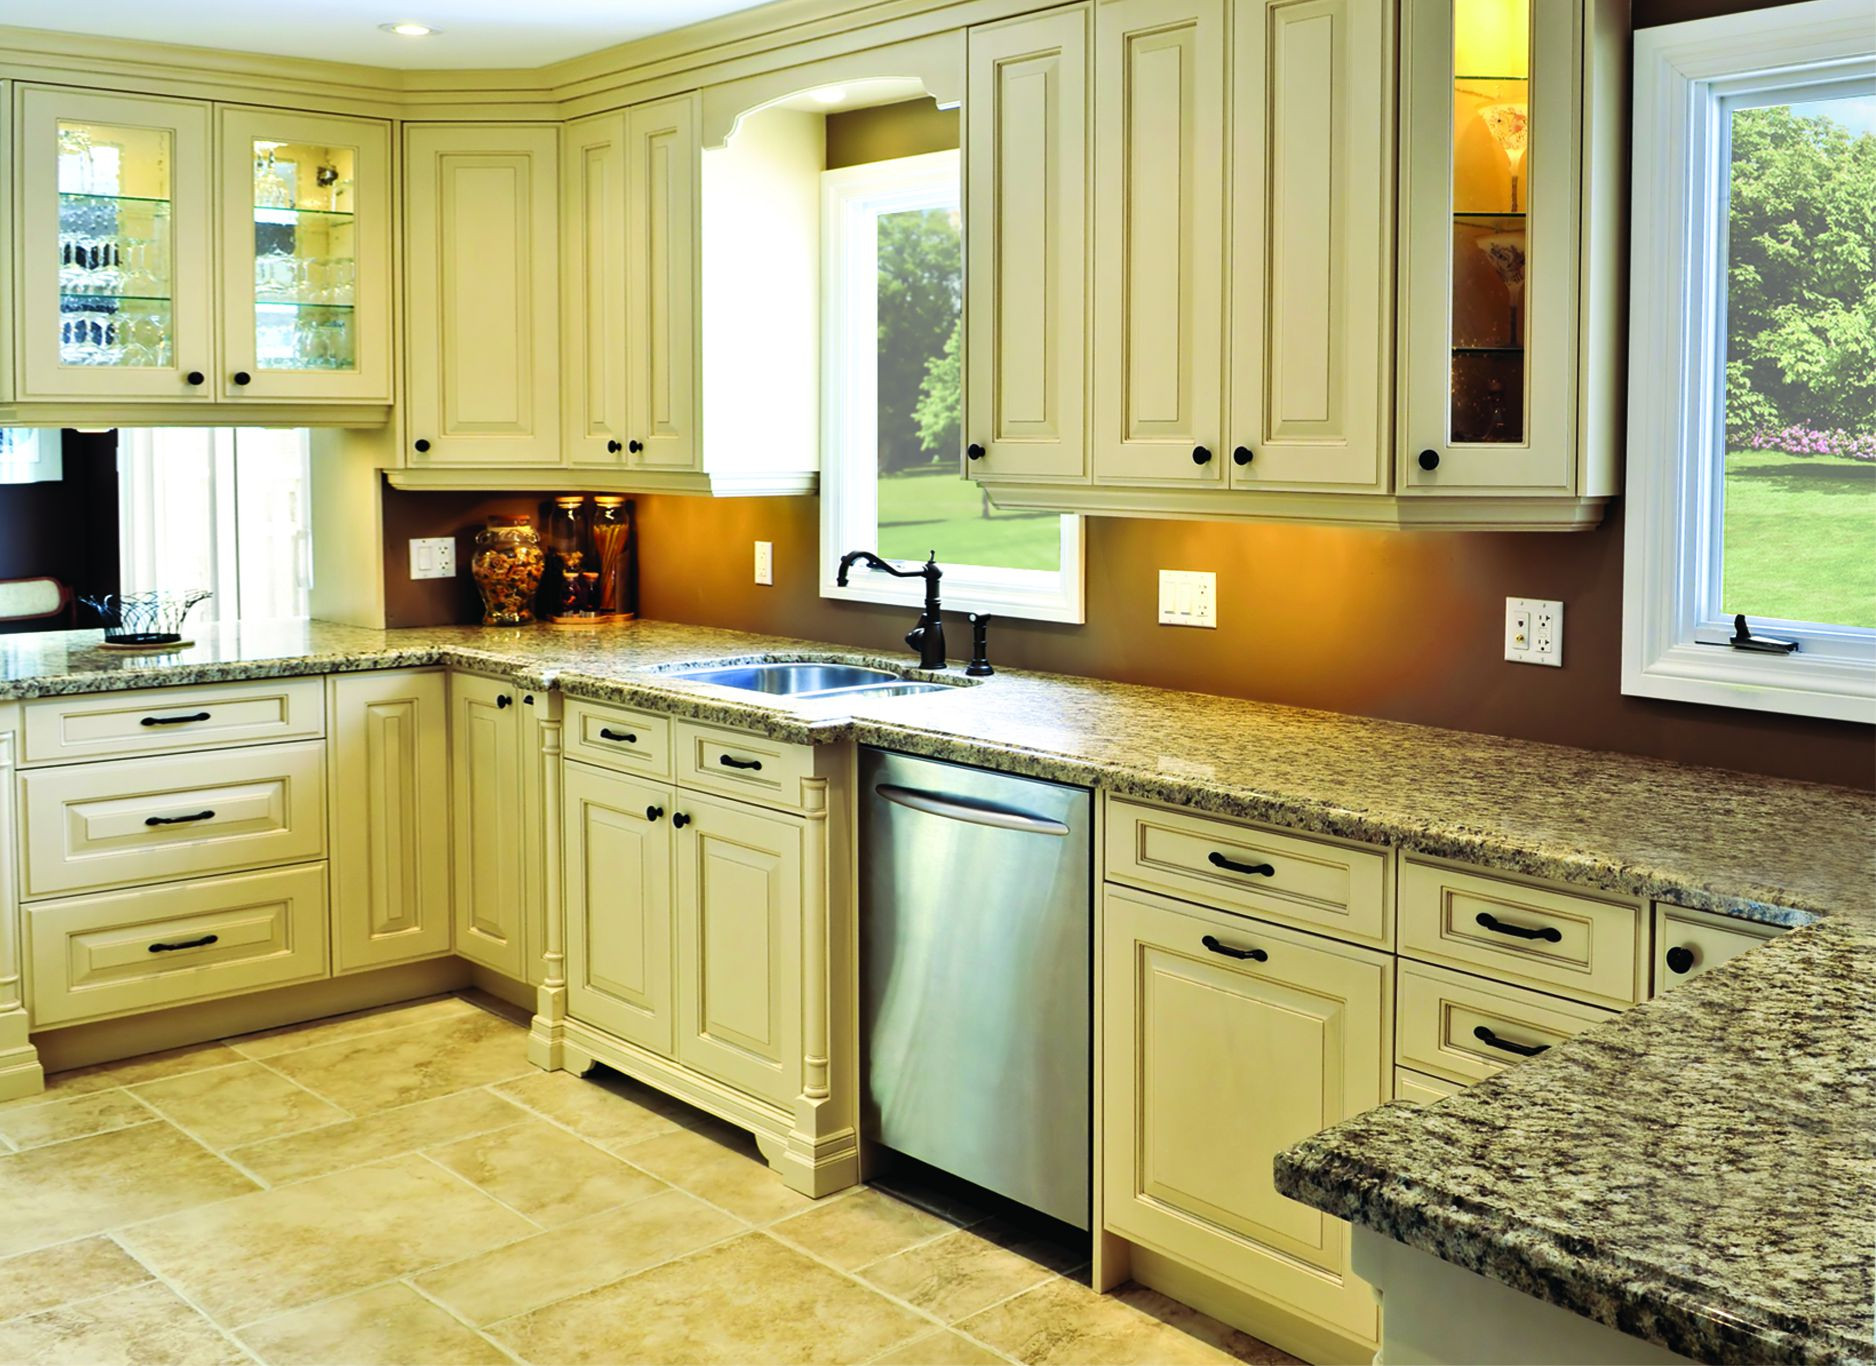 Remodel Ideas For Kitchen
 Some Kitchen Remodeling Ideas To Increase The Value